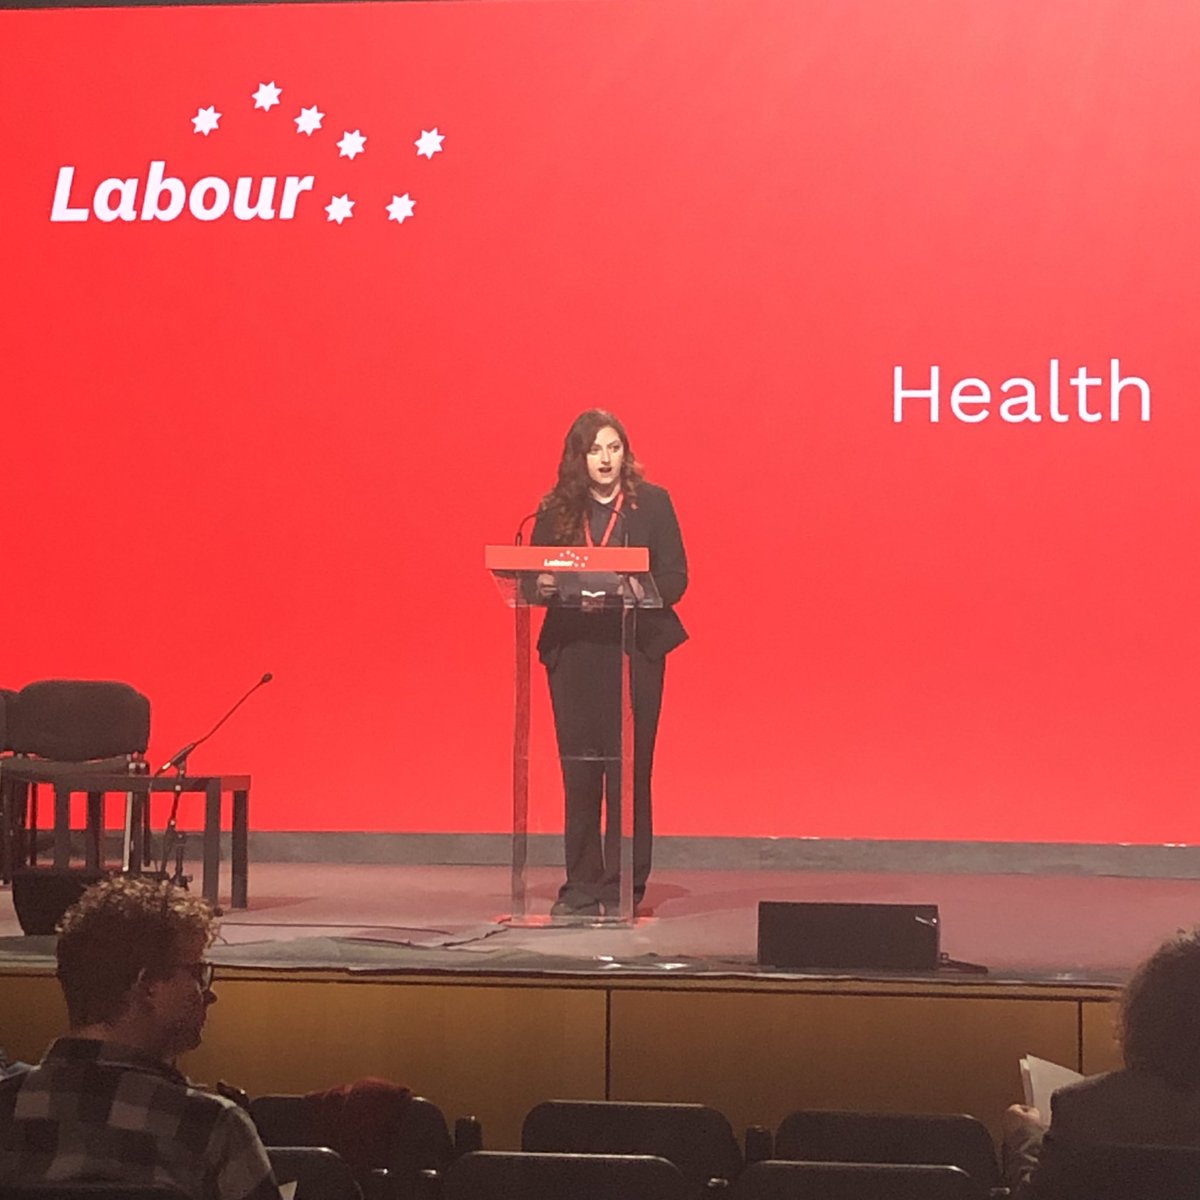 Next up Evie Nevin our candidate in Clonakilty speaking on the crisis in children’s mental health services 🌹💪